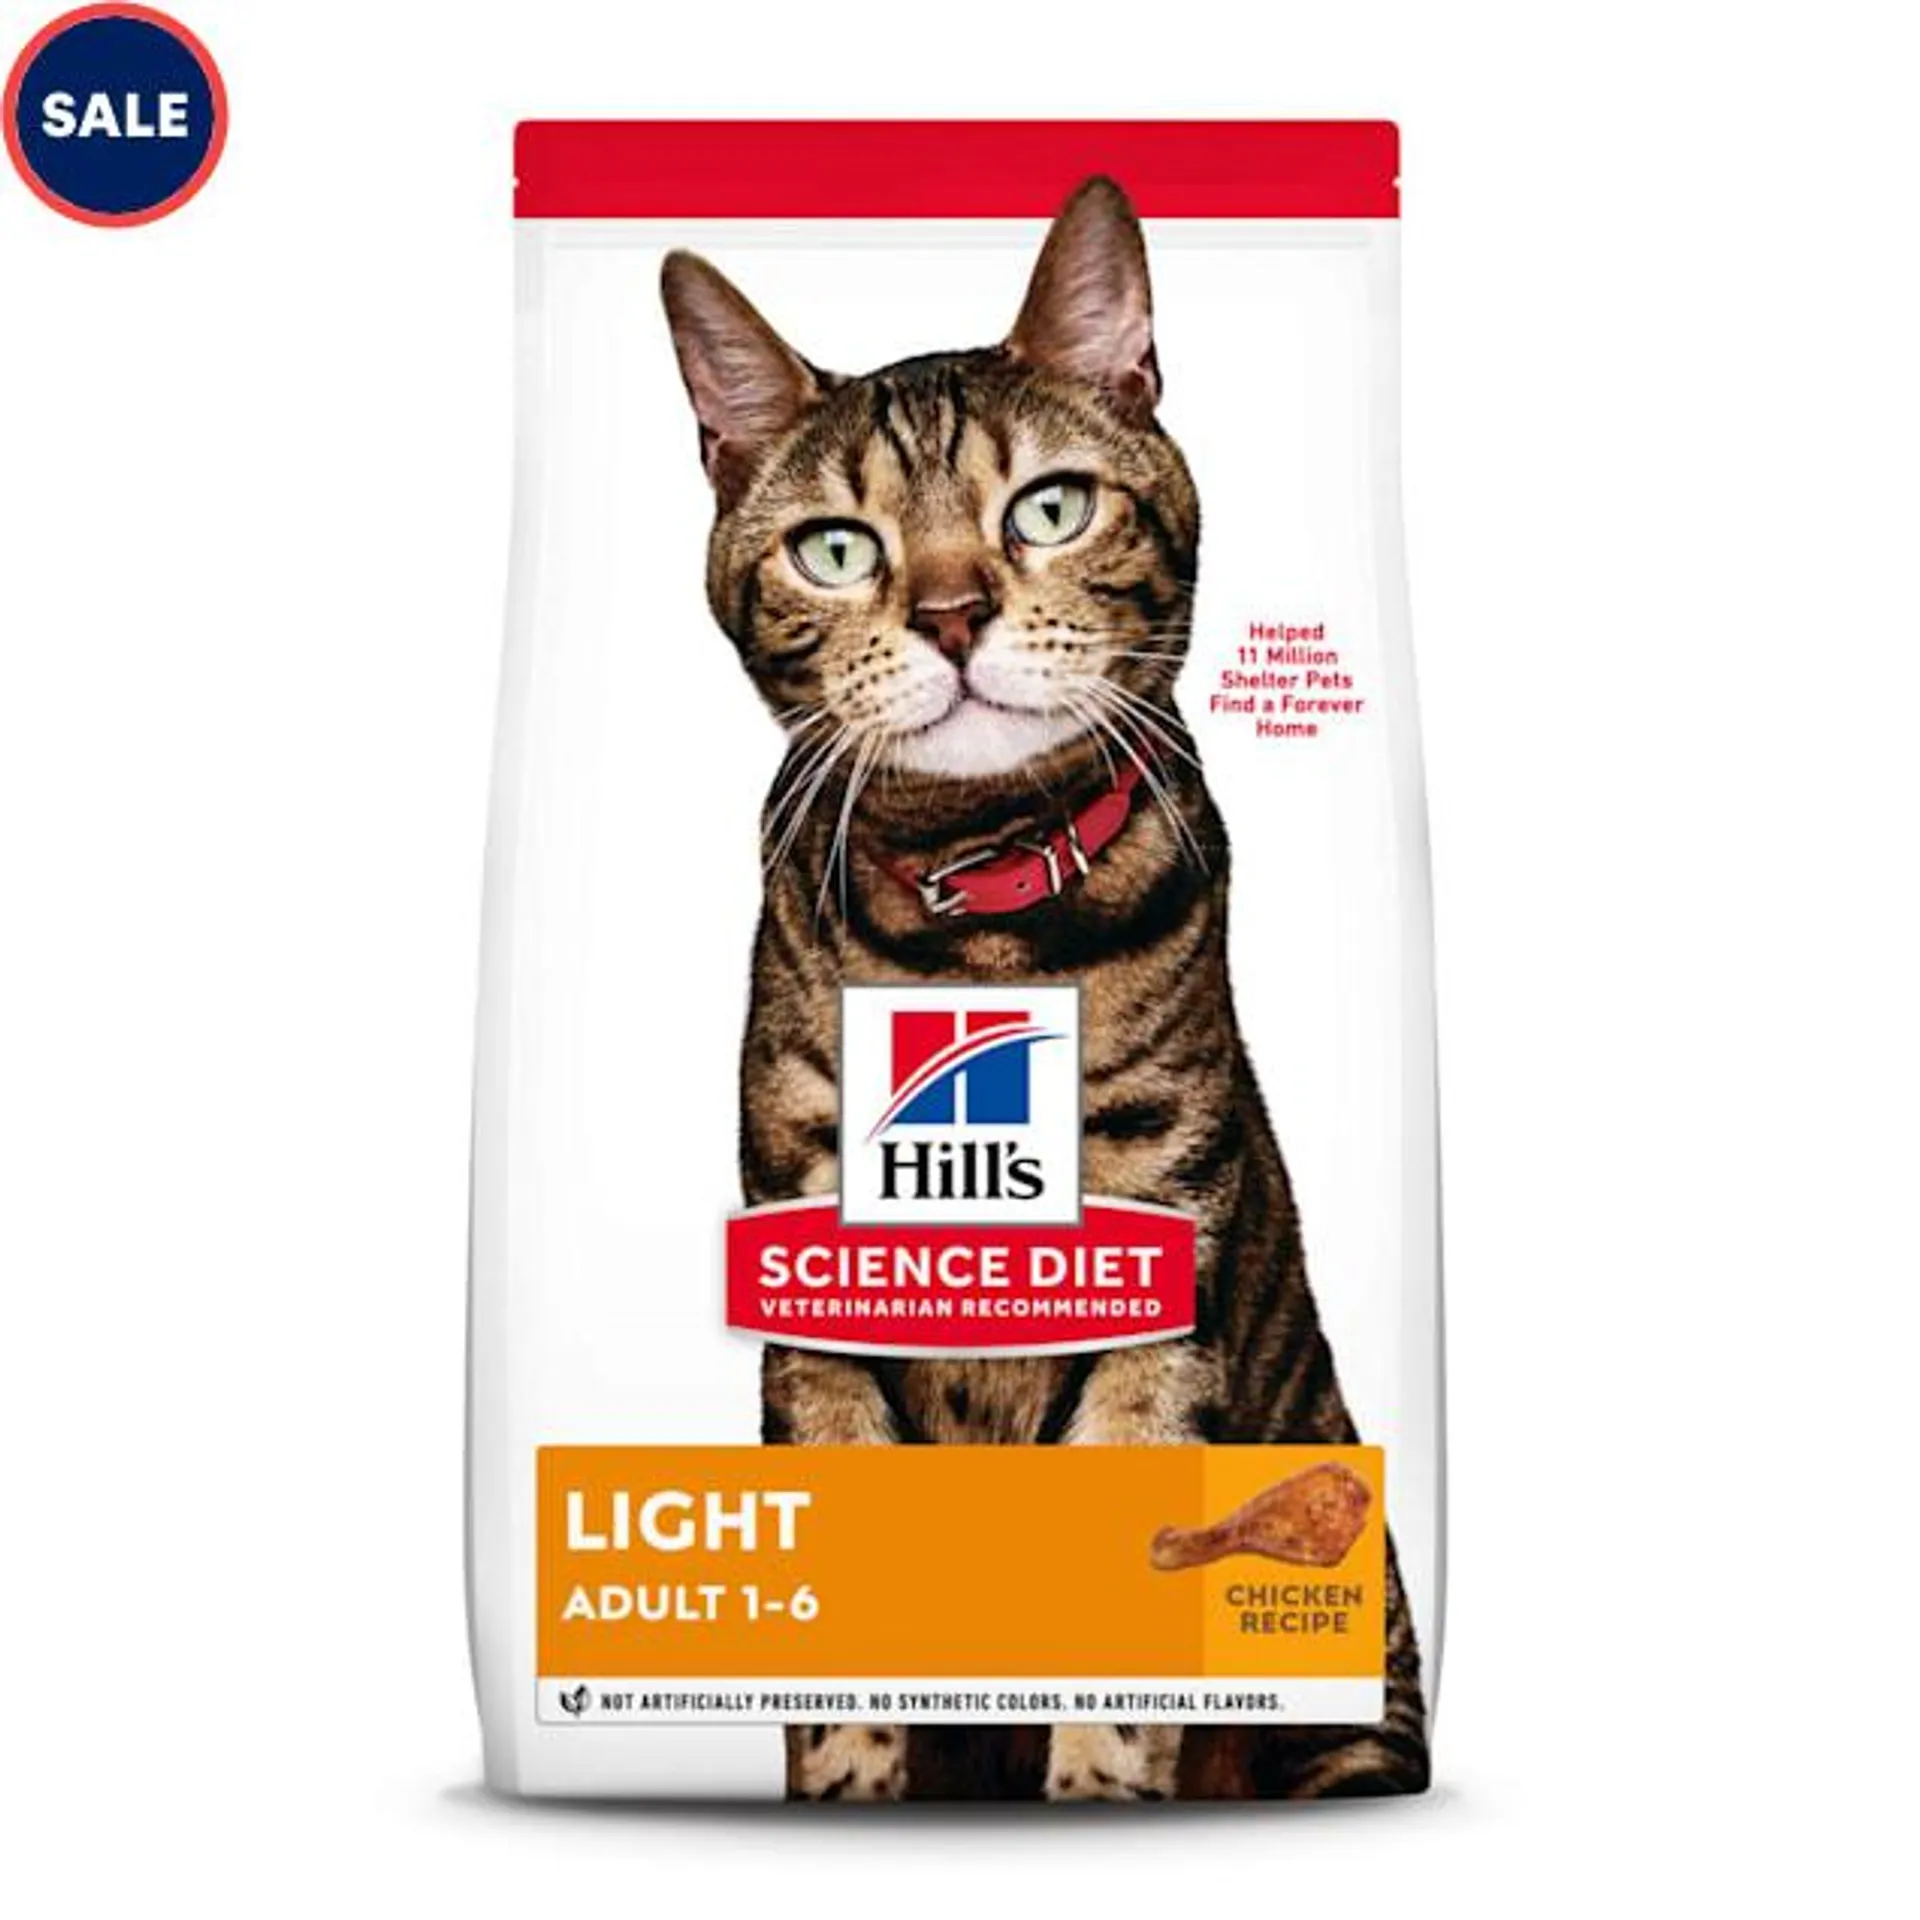 Hill's Science Diet Adult Light Chicken Recipe Dry Cat Food, 16 lbs.